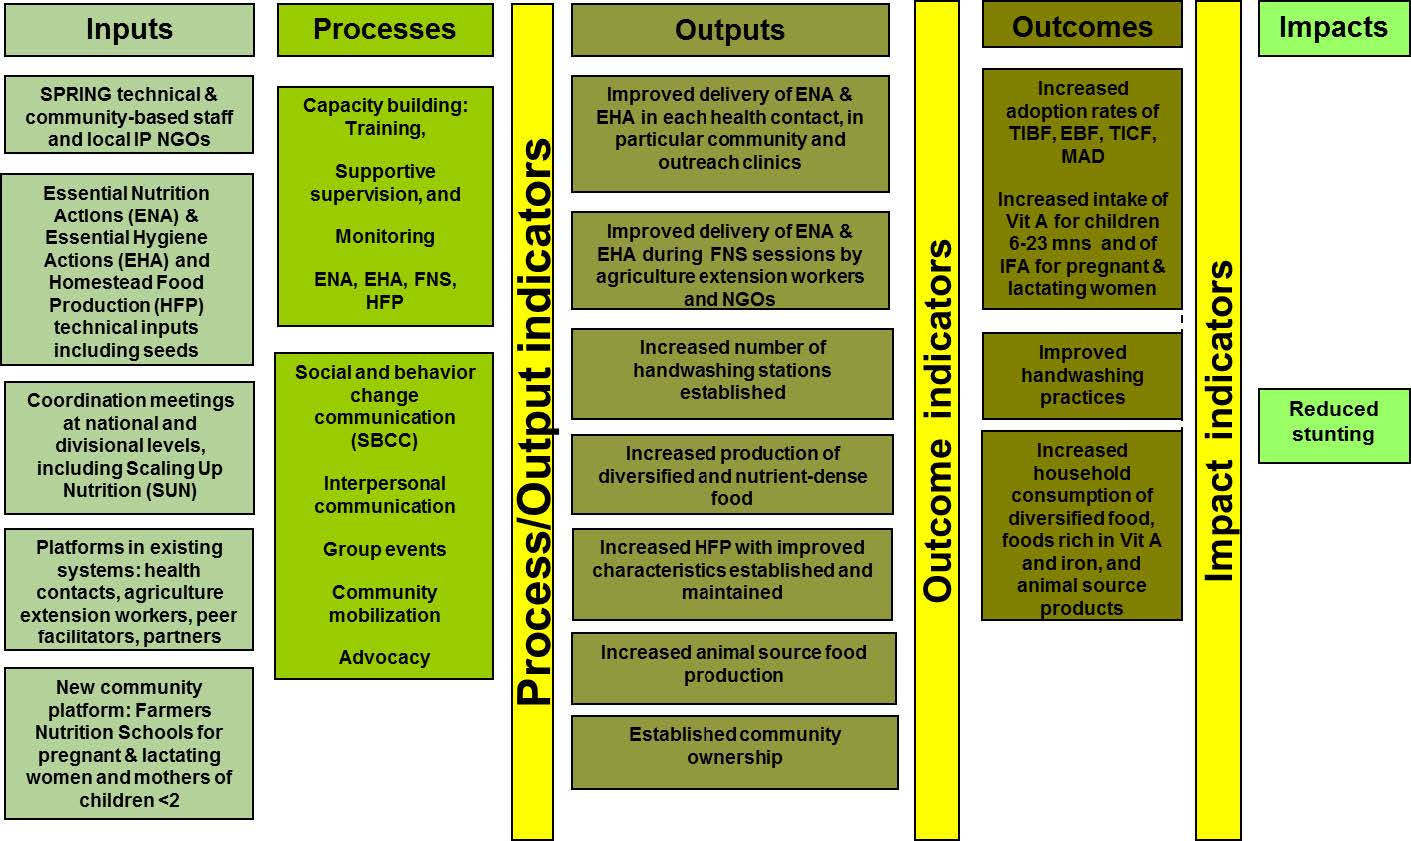 Image of the Conceptual Framework